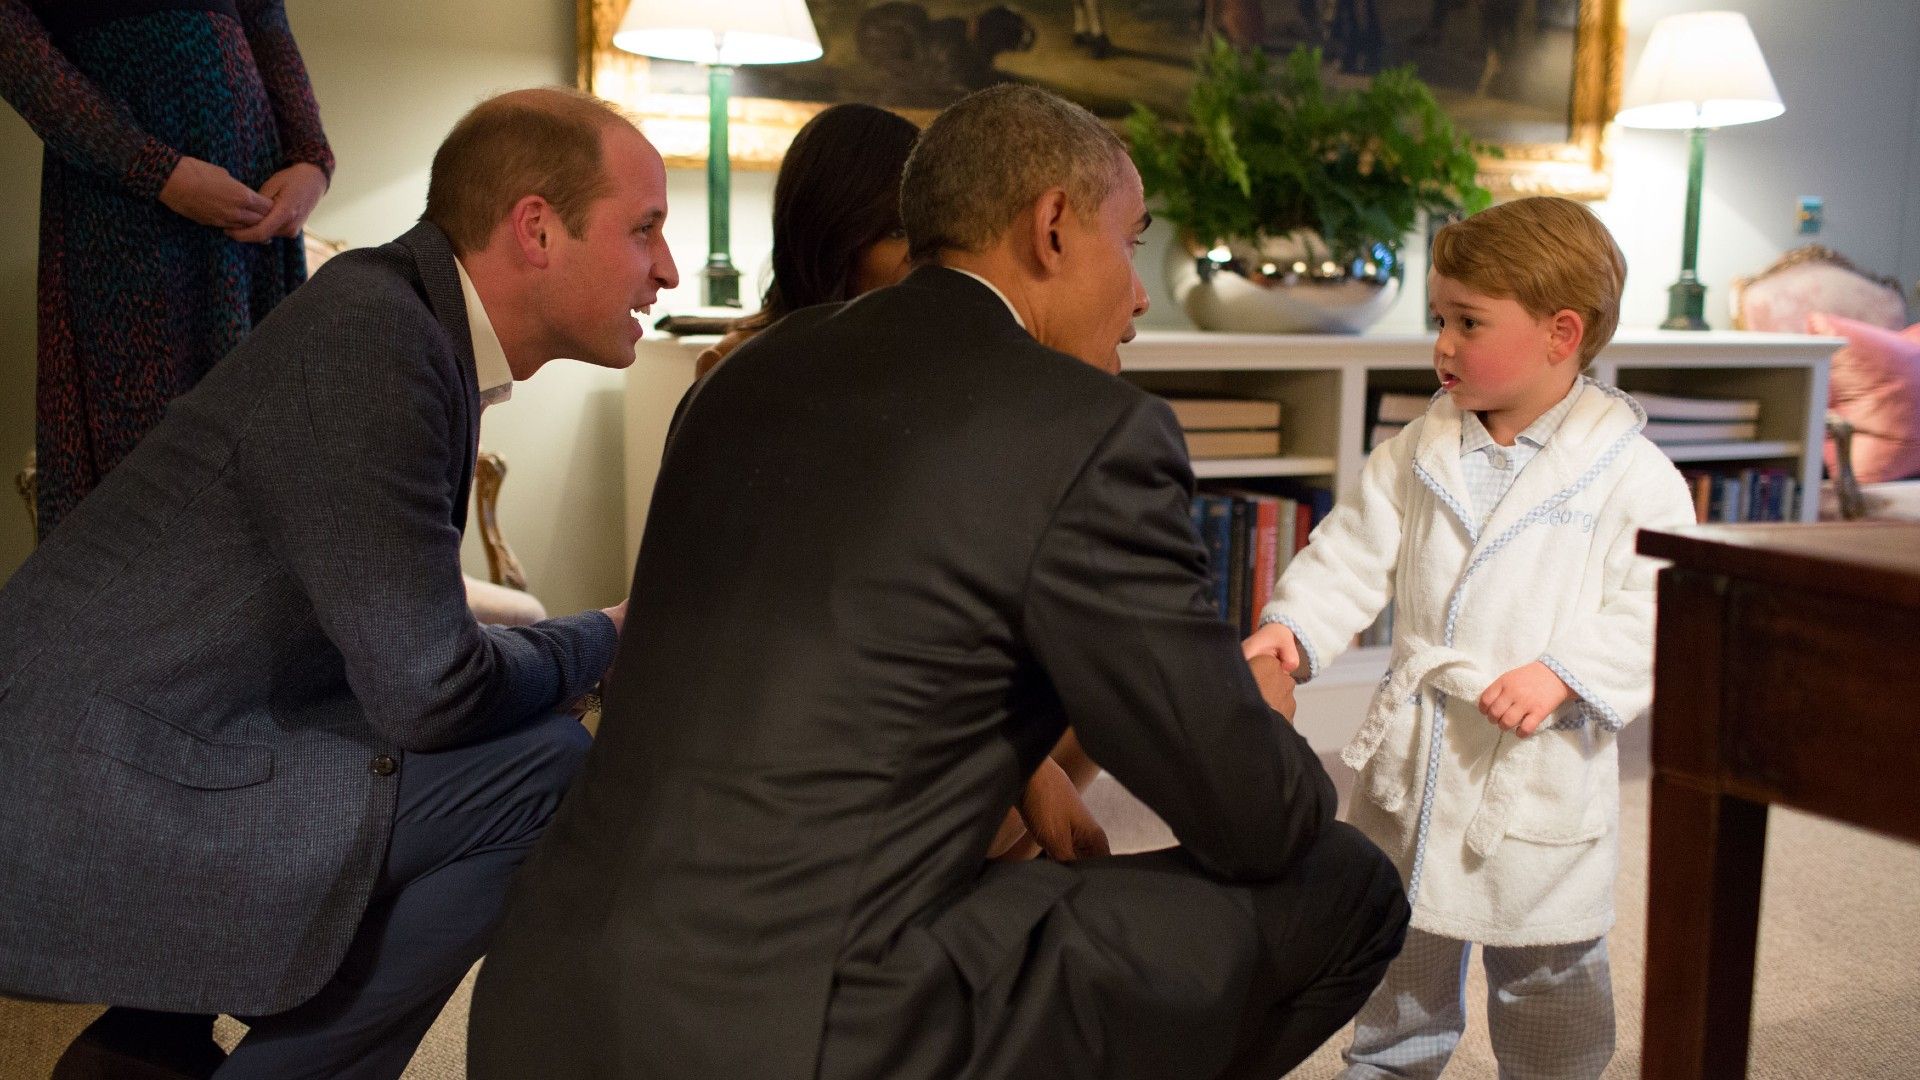 <p>                     In any circumstances, seeing Prince George in his comfy looking robe, cosy as anything in Kensington Palace would be heart-warming enough. But in 2016, George met none other than President Barack Obama while kitted out in his fleecy robe.                   </p>                                      <p>                     The adorable encounter saw President Obama crouch down to greet the Prince, who surely must have stayed up past his bedtime.                   </p>                                      <p>                     For his late night efforts, he was reportedly gifted a wooden rocking horse by the President and First Lady Michelle.                   </p>